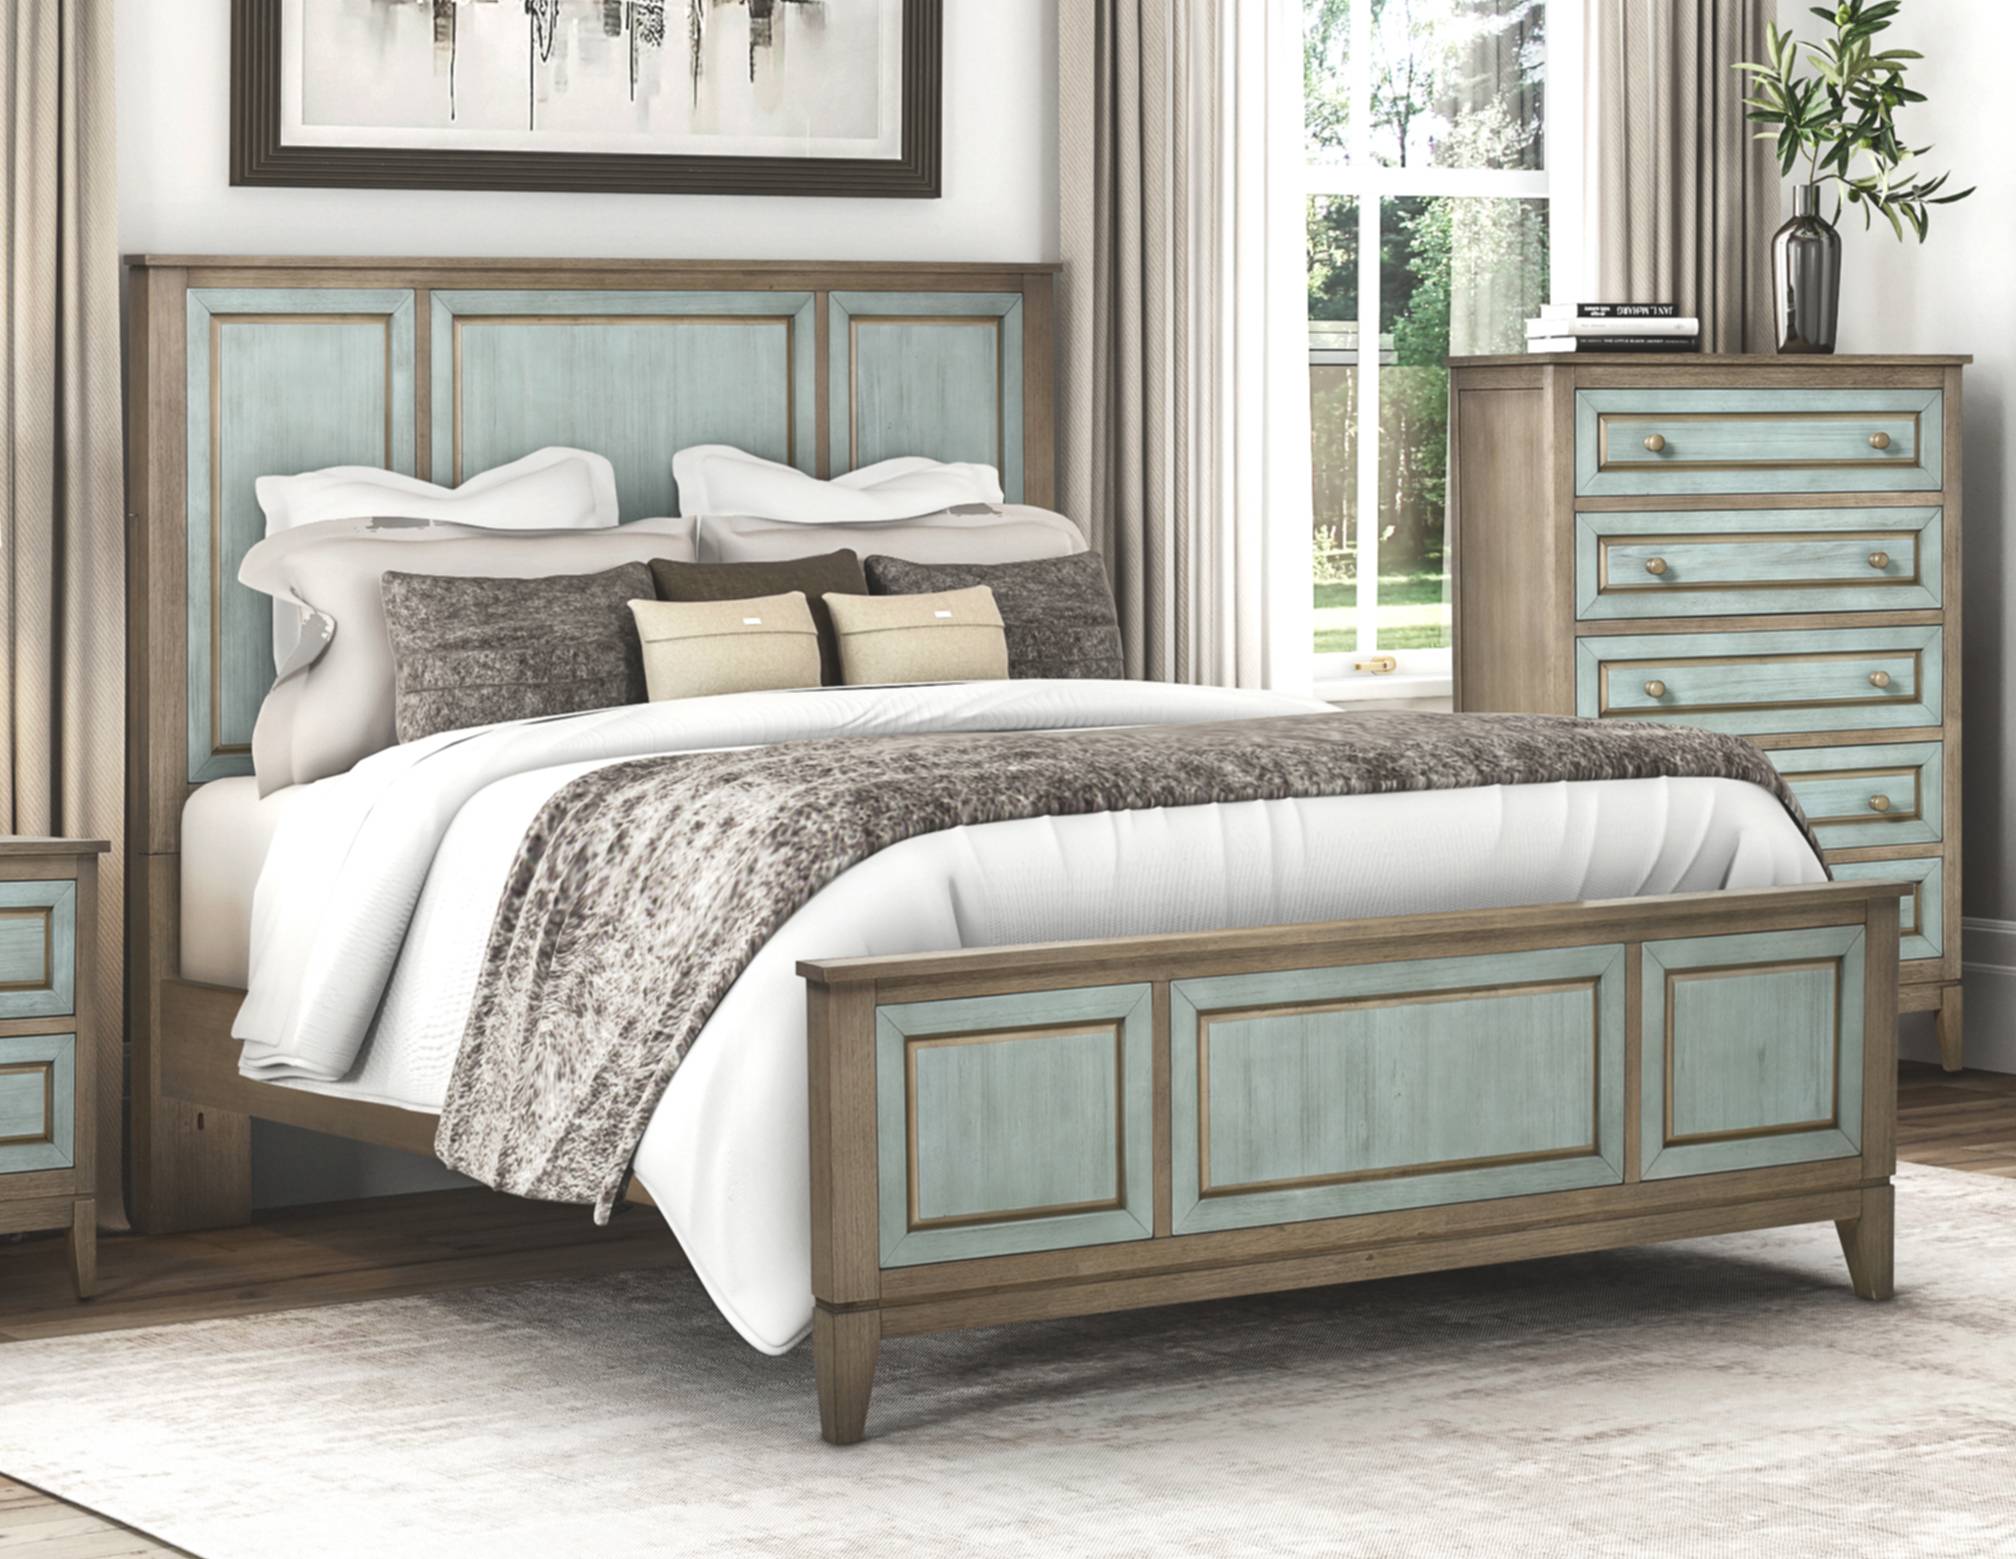 SANIBEL COMPLETE BED BY SEAWINDS TRADING